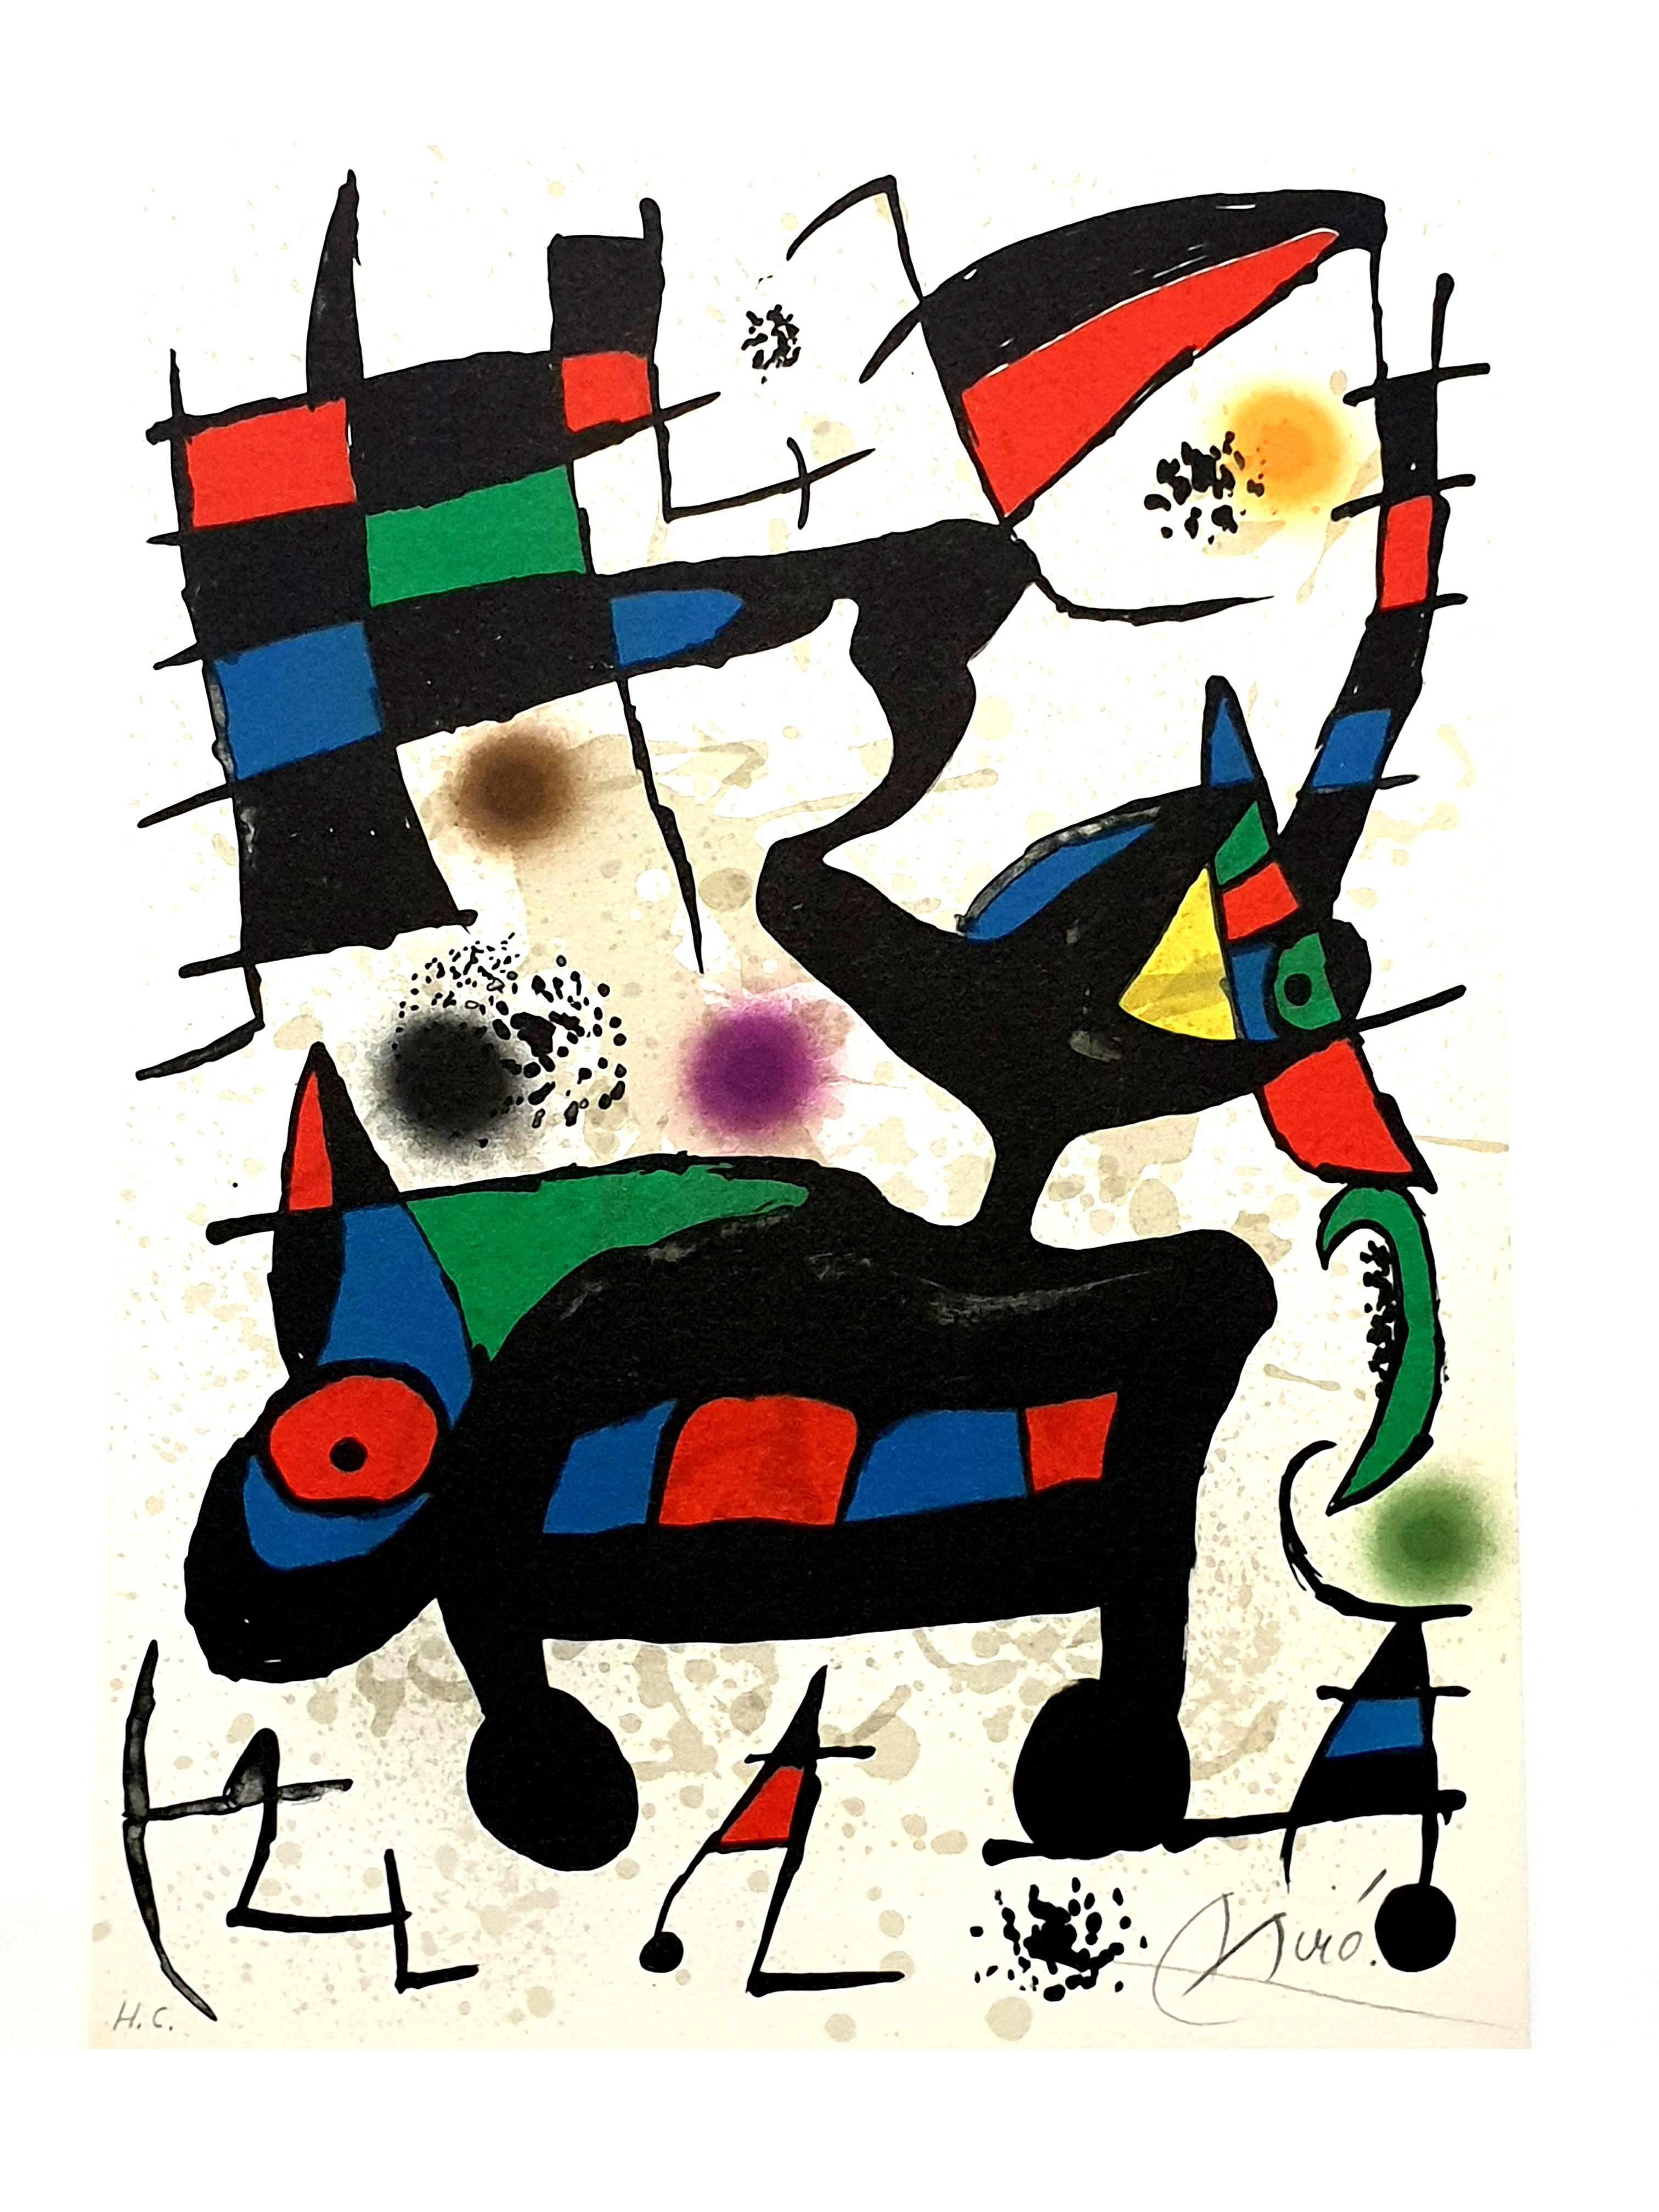 “Plate I,” from “Oda à Joan Miró,” by Joan Brossa Lithograph in colors, 1973 Signed in pencil and inscribed “H.C.” (presumably one of 10; the total edition was 525) Published by La Polígrafa S.A., Barcelona
Dimensions: 33.5 x 24.3 cm
Reference: